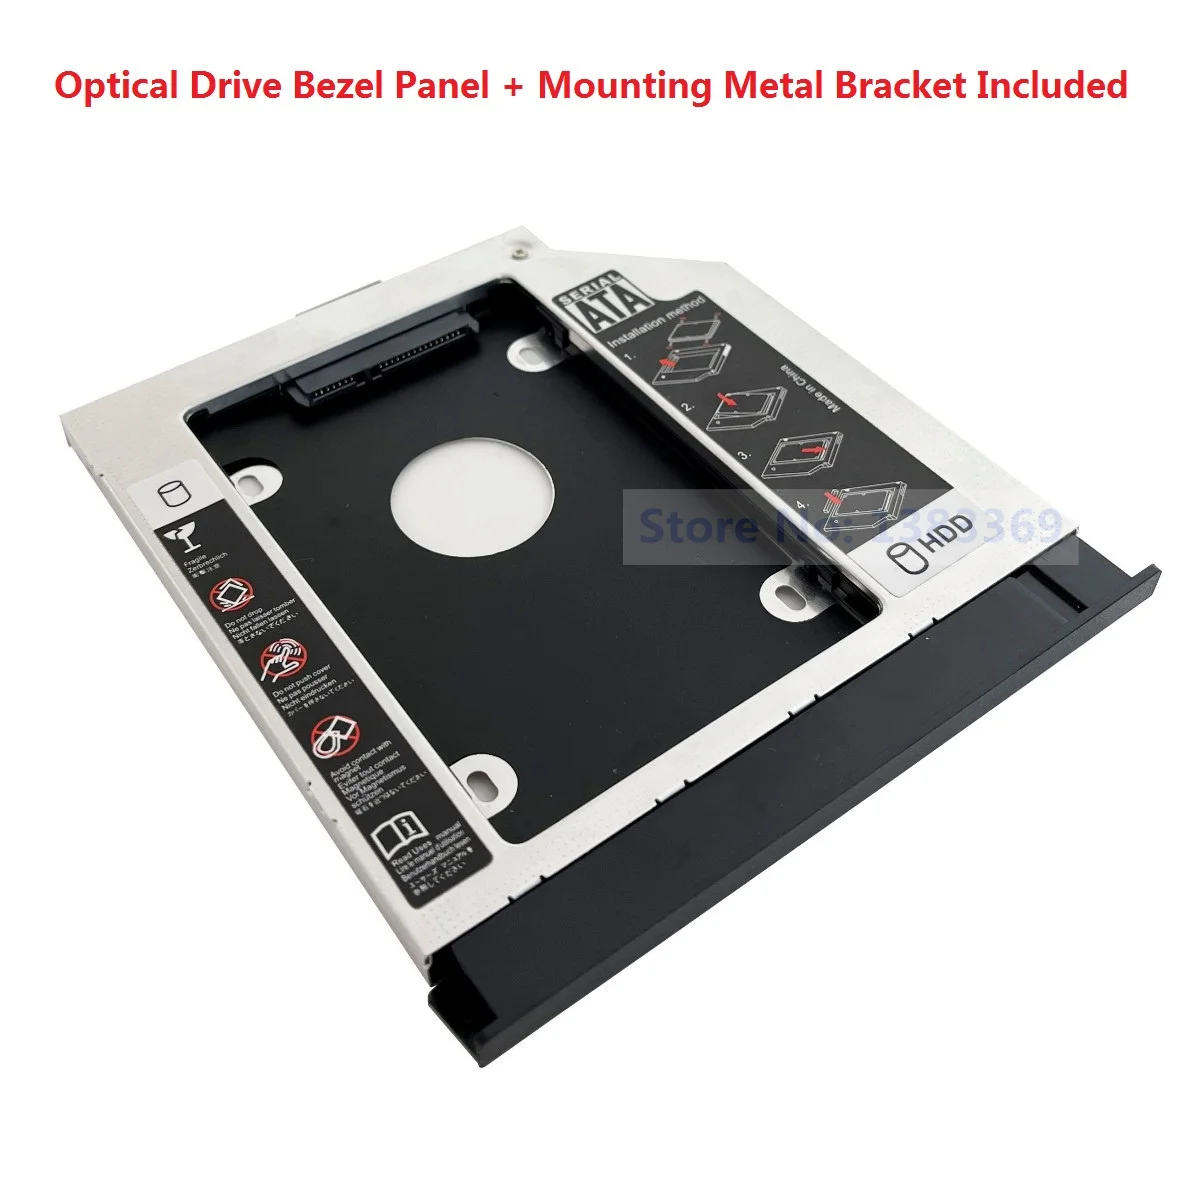 SATA 2nd Hard Drive SSD HDD Module Optical Caddy Frame Tray for Lenovo ThinkPad E540 E531 With Bezel Panel and Bracket